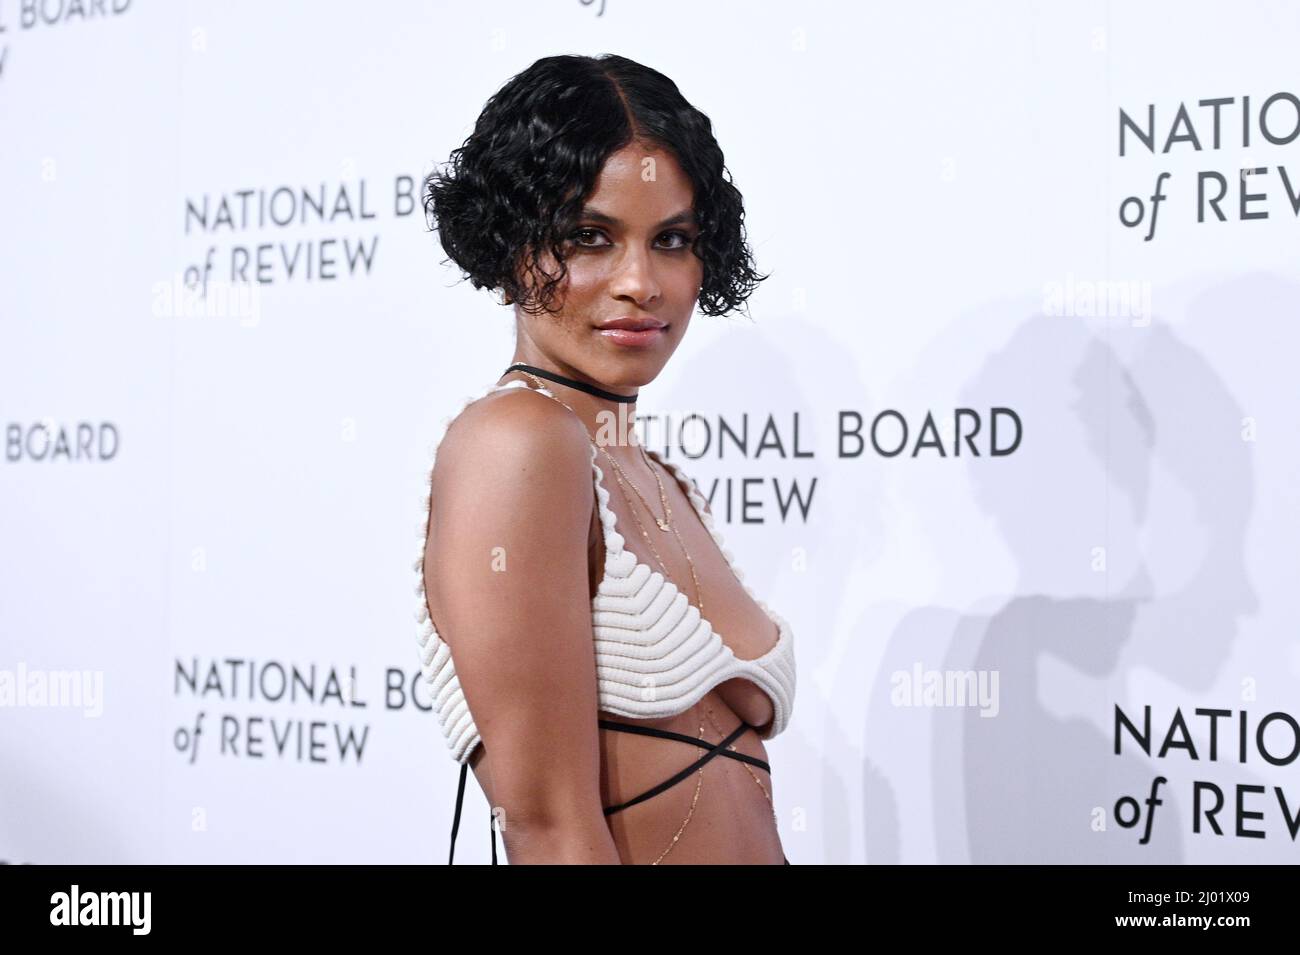 German-US actress Zazie Beetz walking on the red carpet during the National  Board of Review Annual Awards held at Cipriani 42nd Street in New York, NY  on March 15, 2022. (Photo by